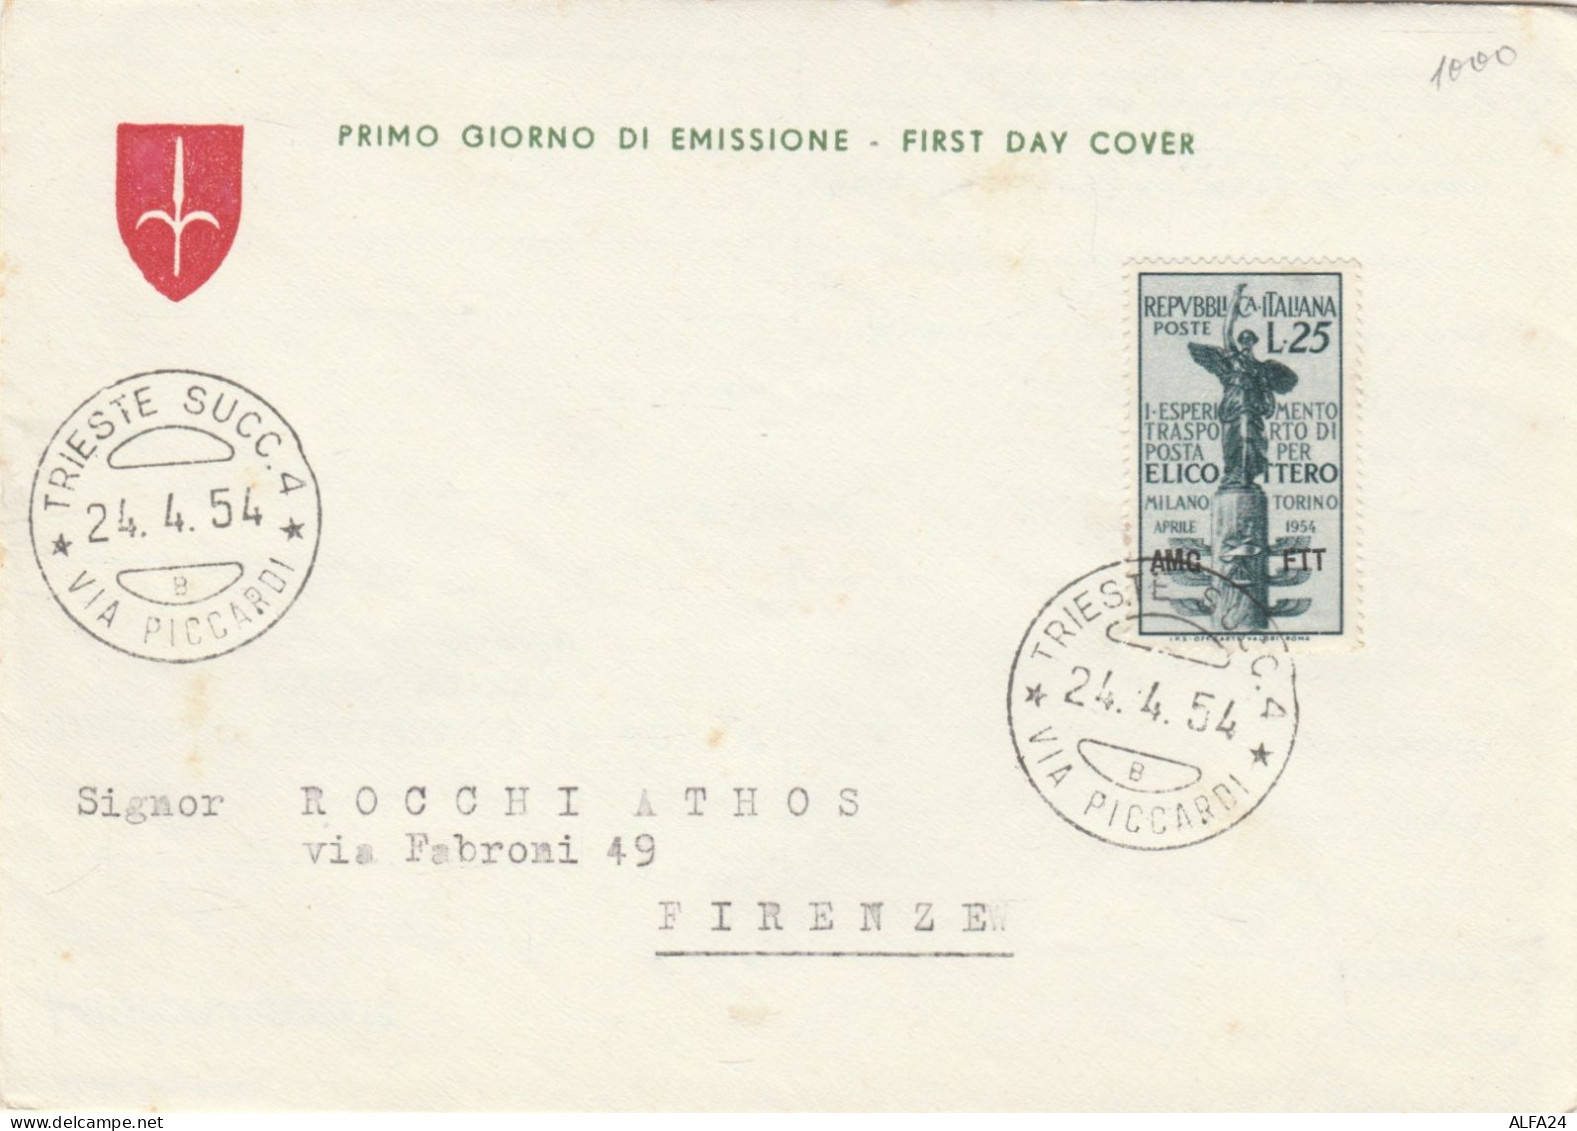 FDC AMG FTT 1954 L.25 POSTA PER ELICOTTERO (RY4555 - Marcophilie